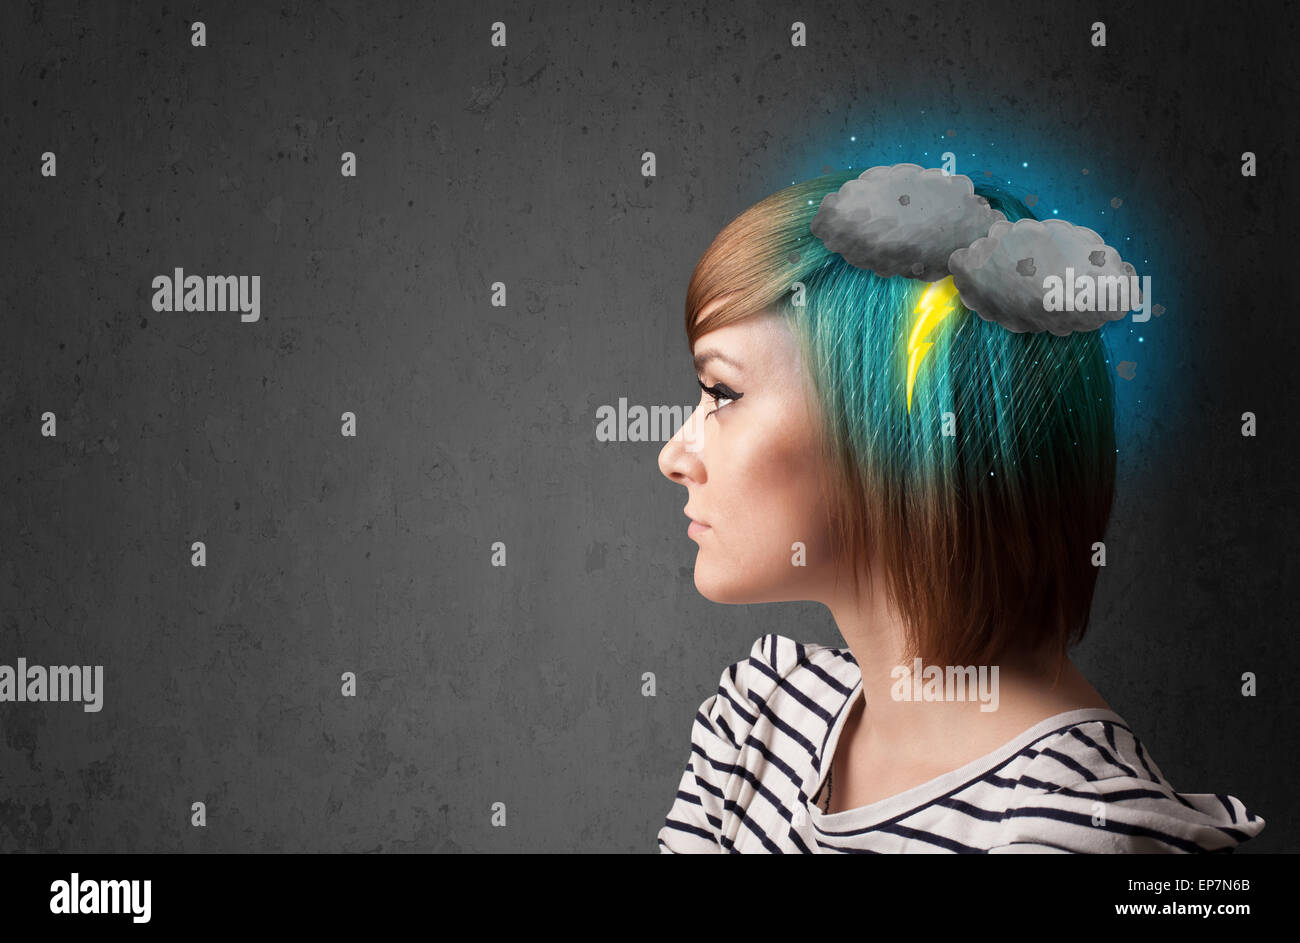 Young girl with thunderstorm lightning headache Stock Photo